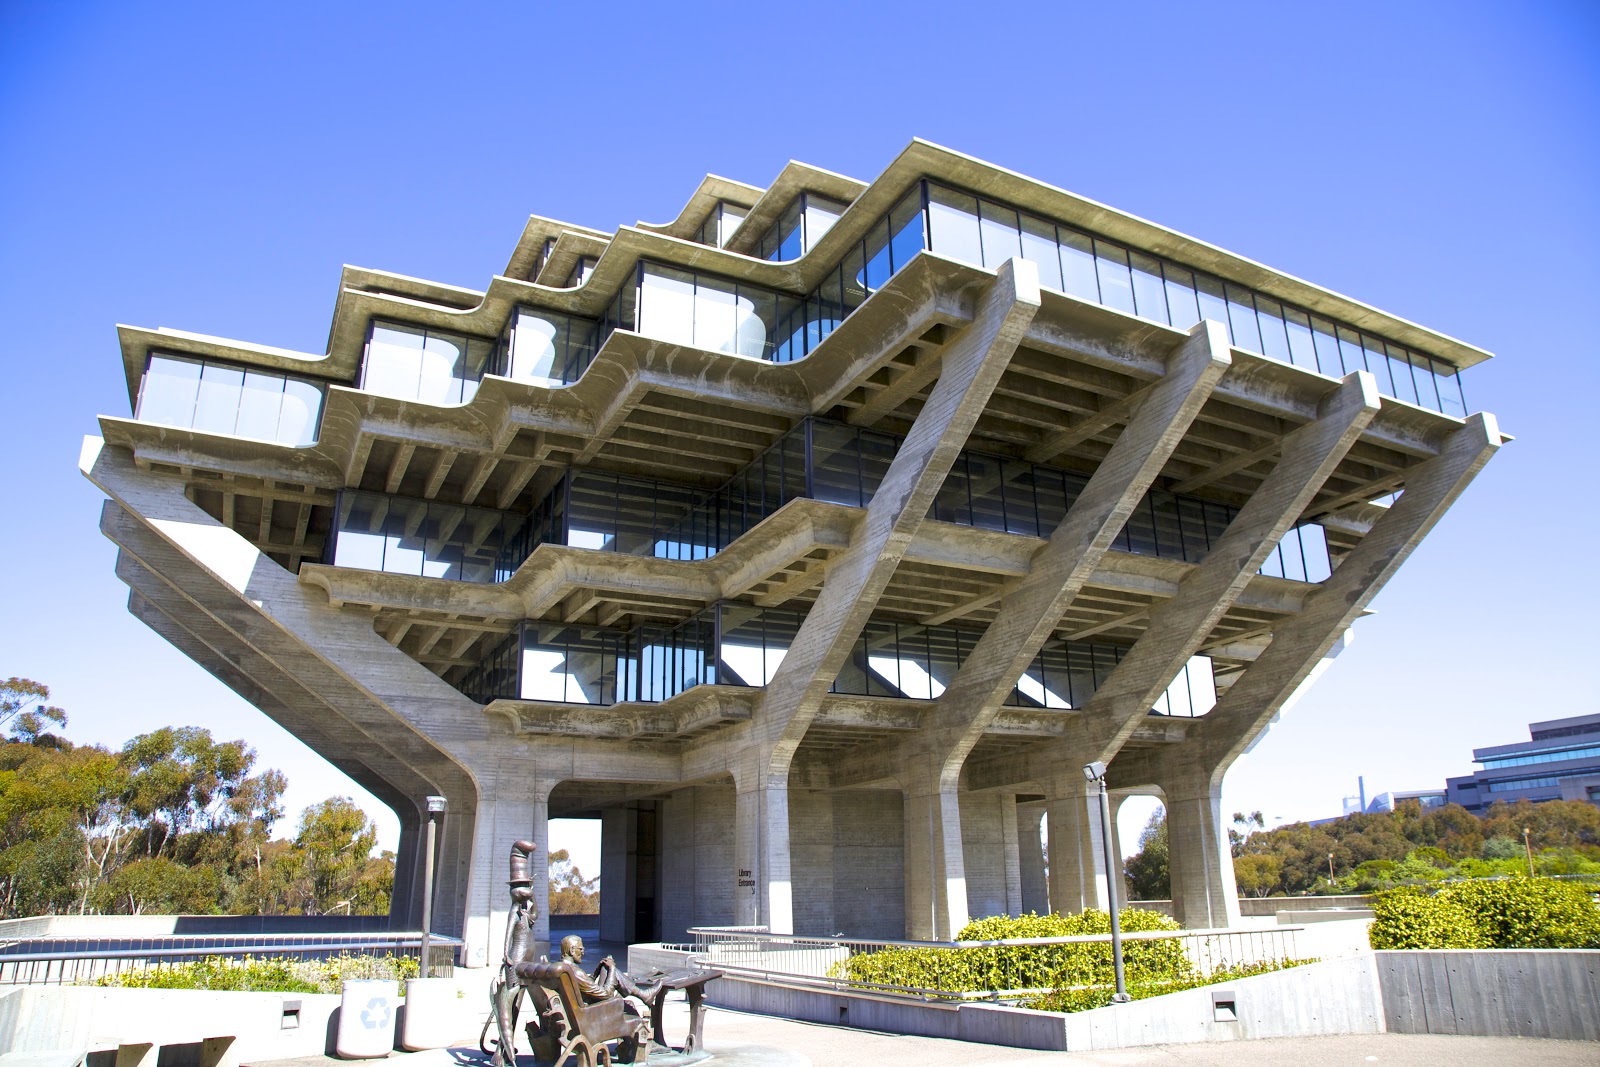 How do I access the UCSD library from off campus?